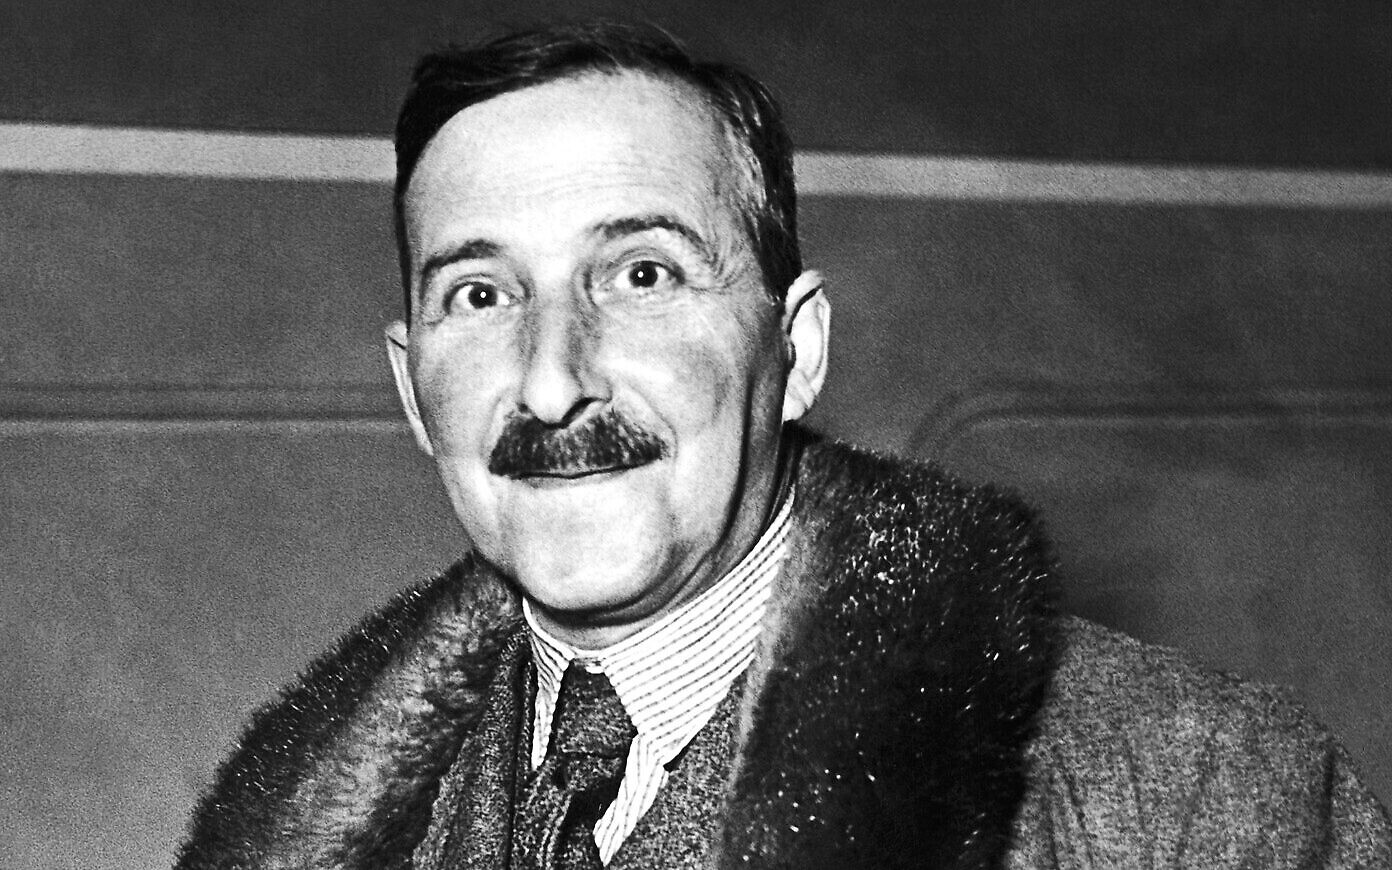 Diaries show literary giant Stefan Zweig's inner turmoil as Nazis stormed Europe | The Times of Israel